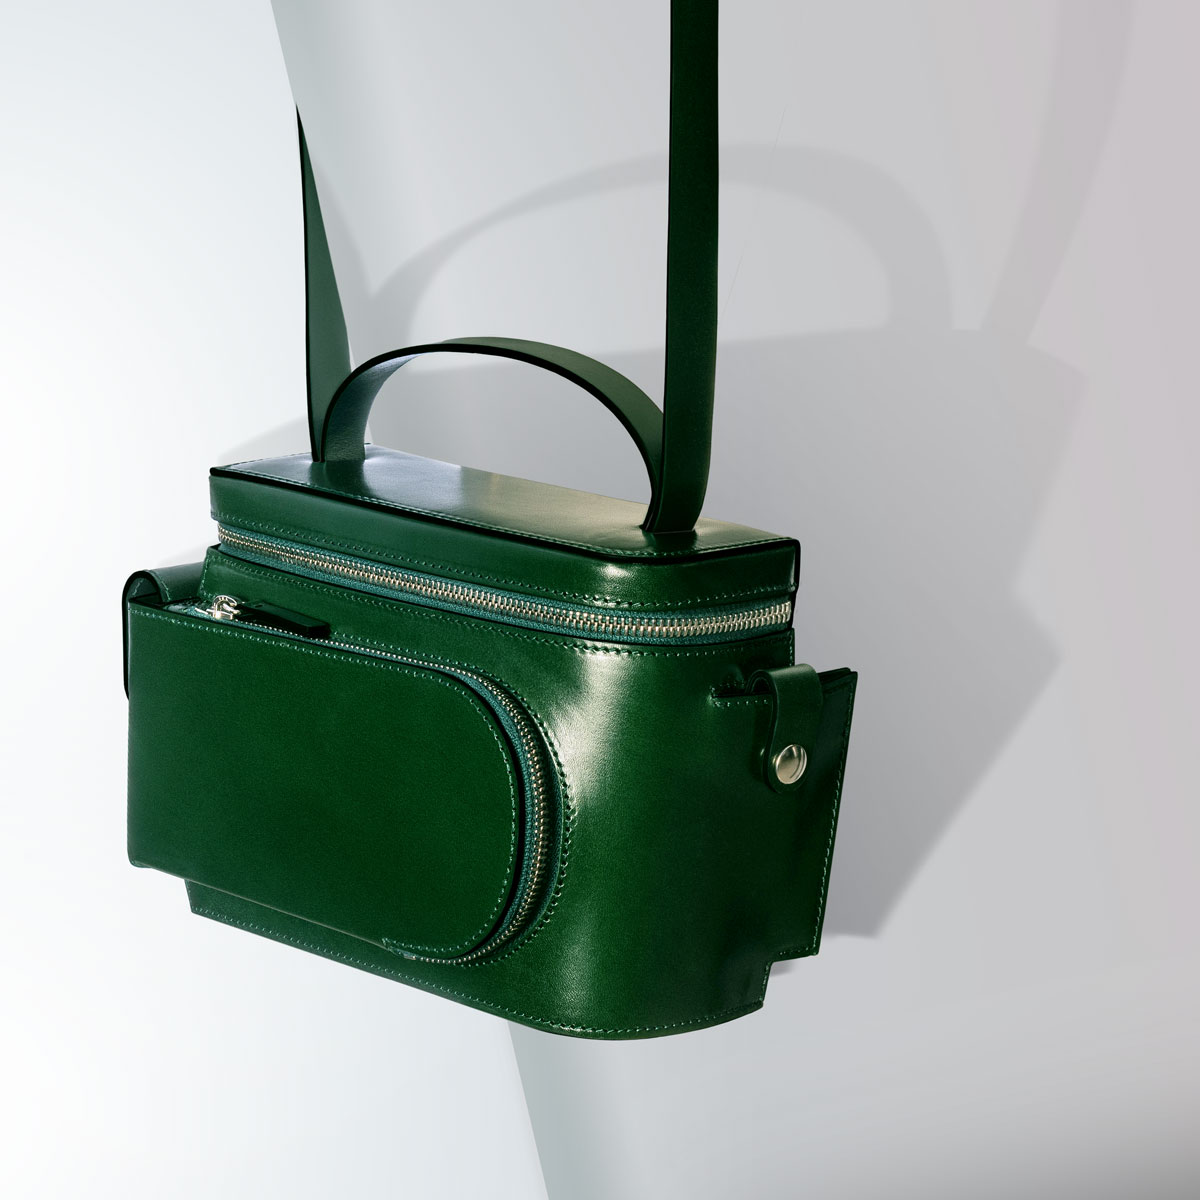 Merryl Tielman, Esther bag: a compact bag, to be to worn over the shoulder or crossbody, or carried by hand for a vanity style look. Made in Italy, vegetable tanned cow leather, colour dark green.